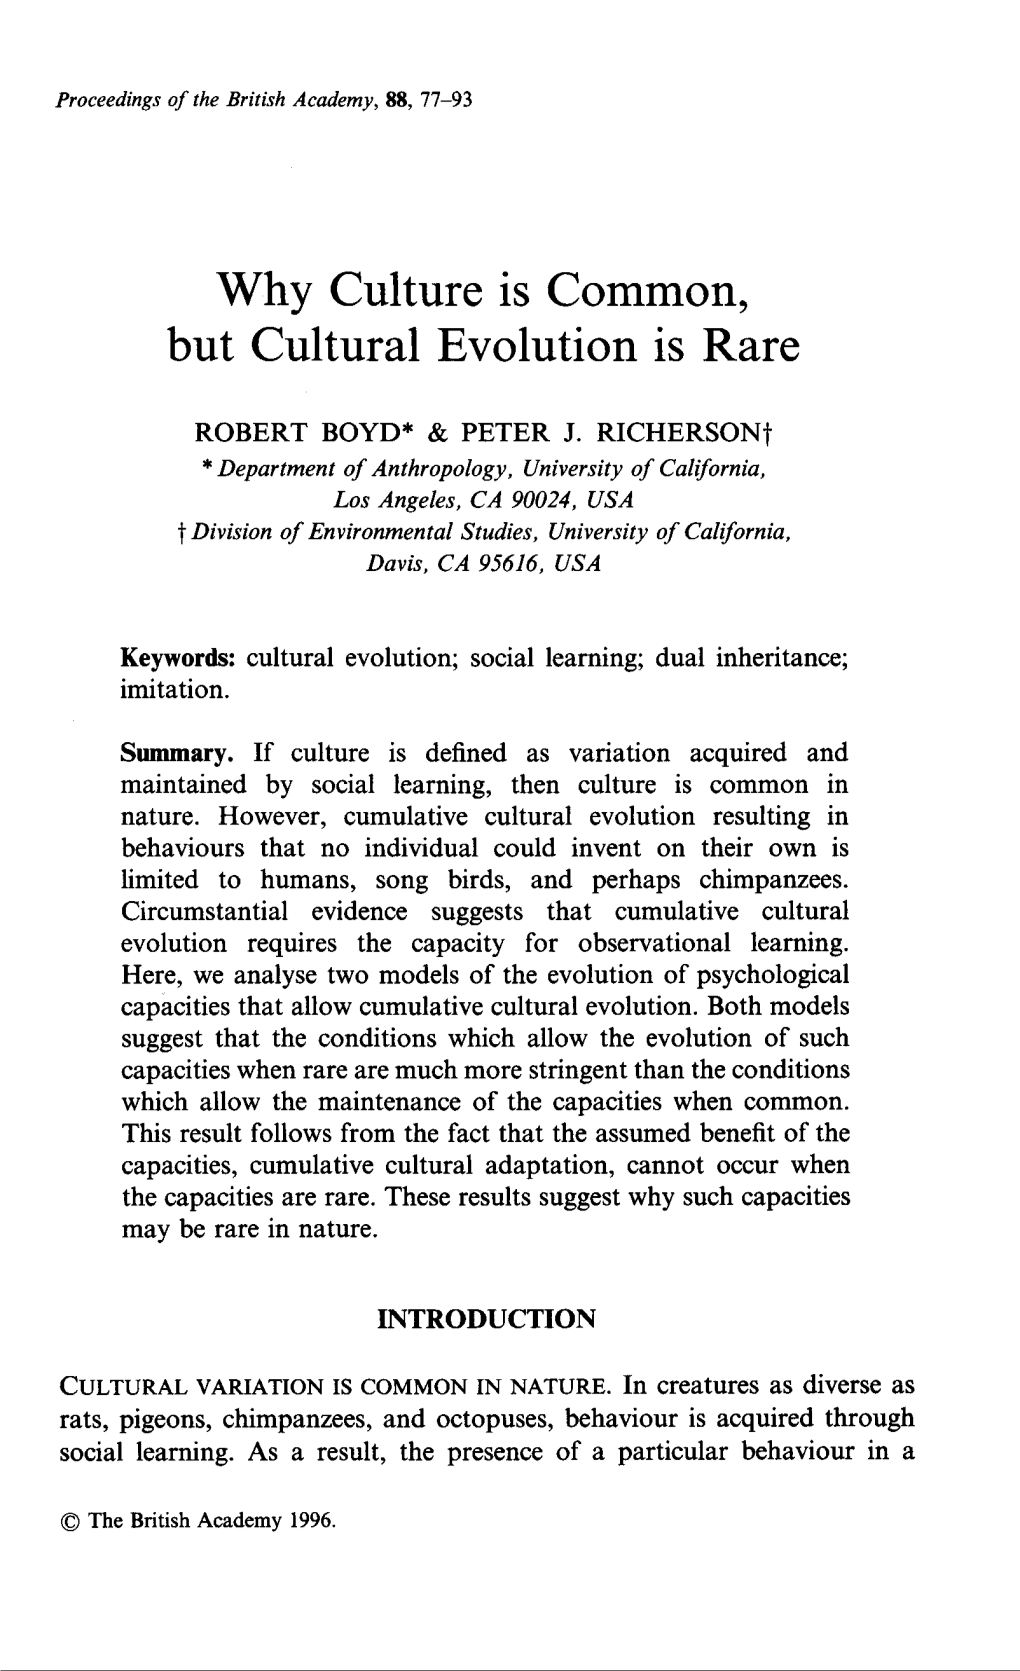 Why Culture Is Common, but Cultural Evolution Is Rare